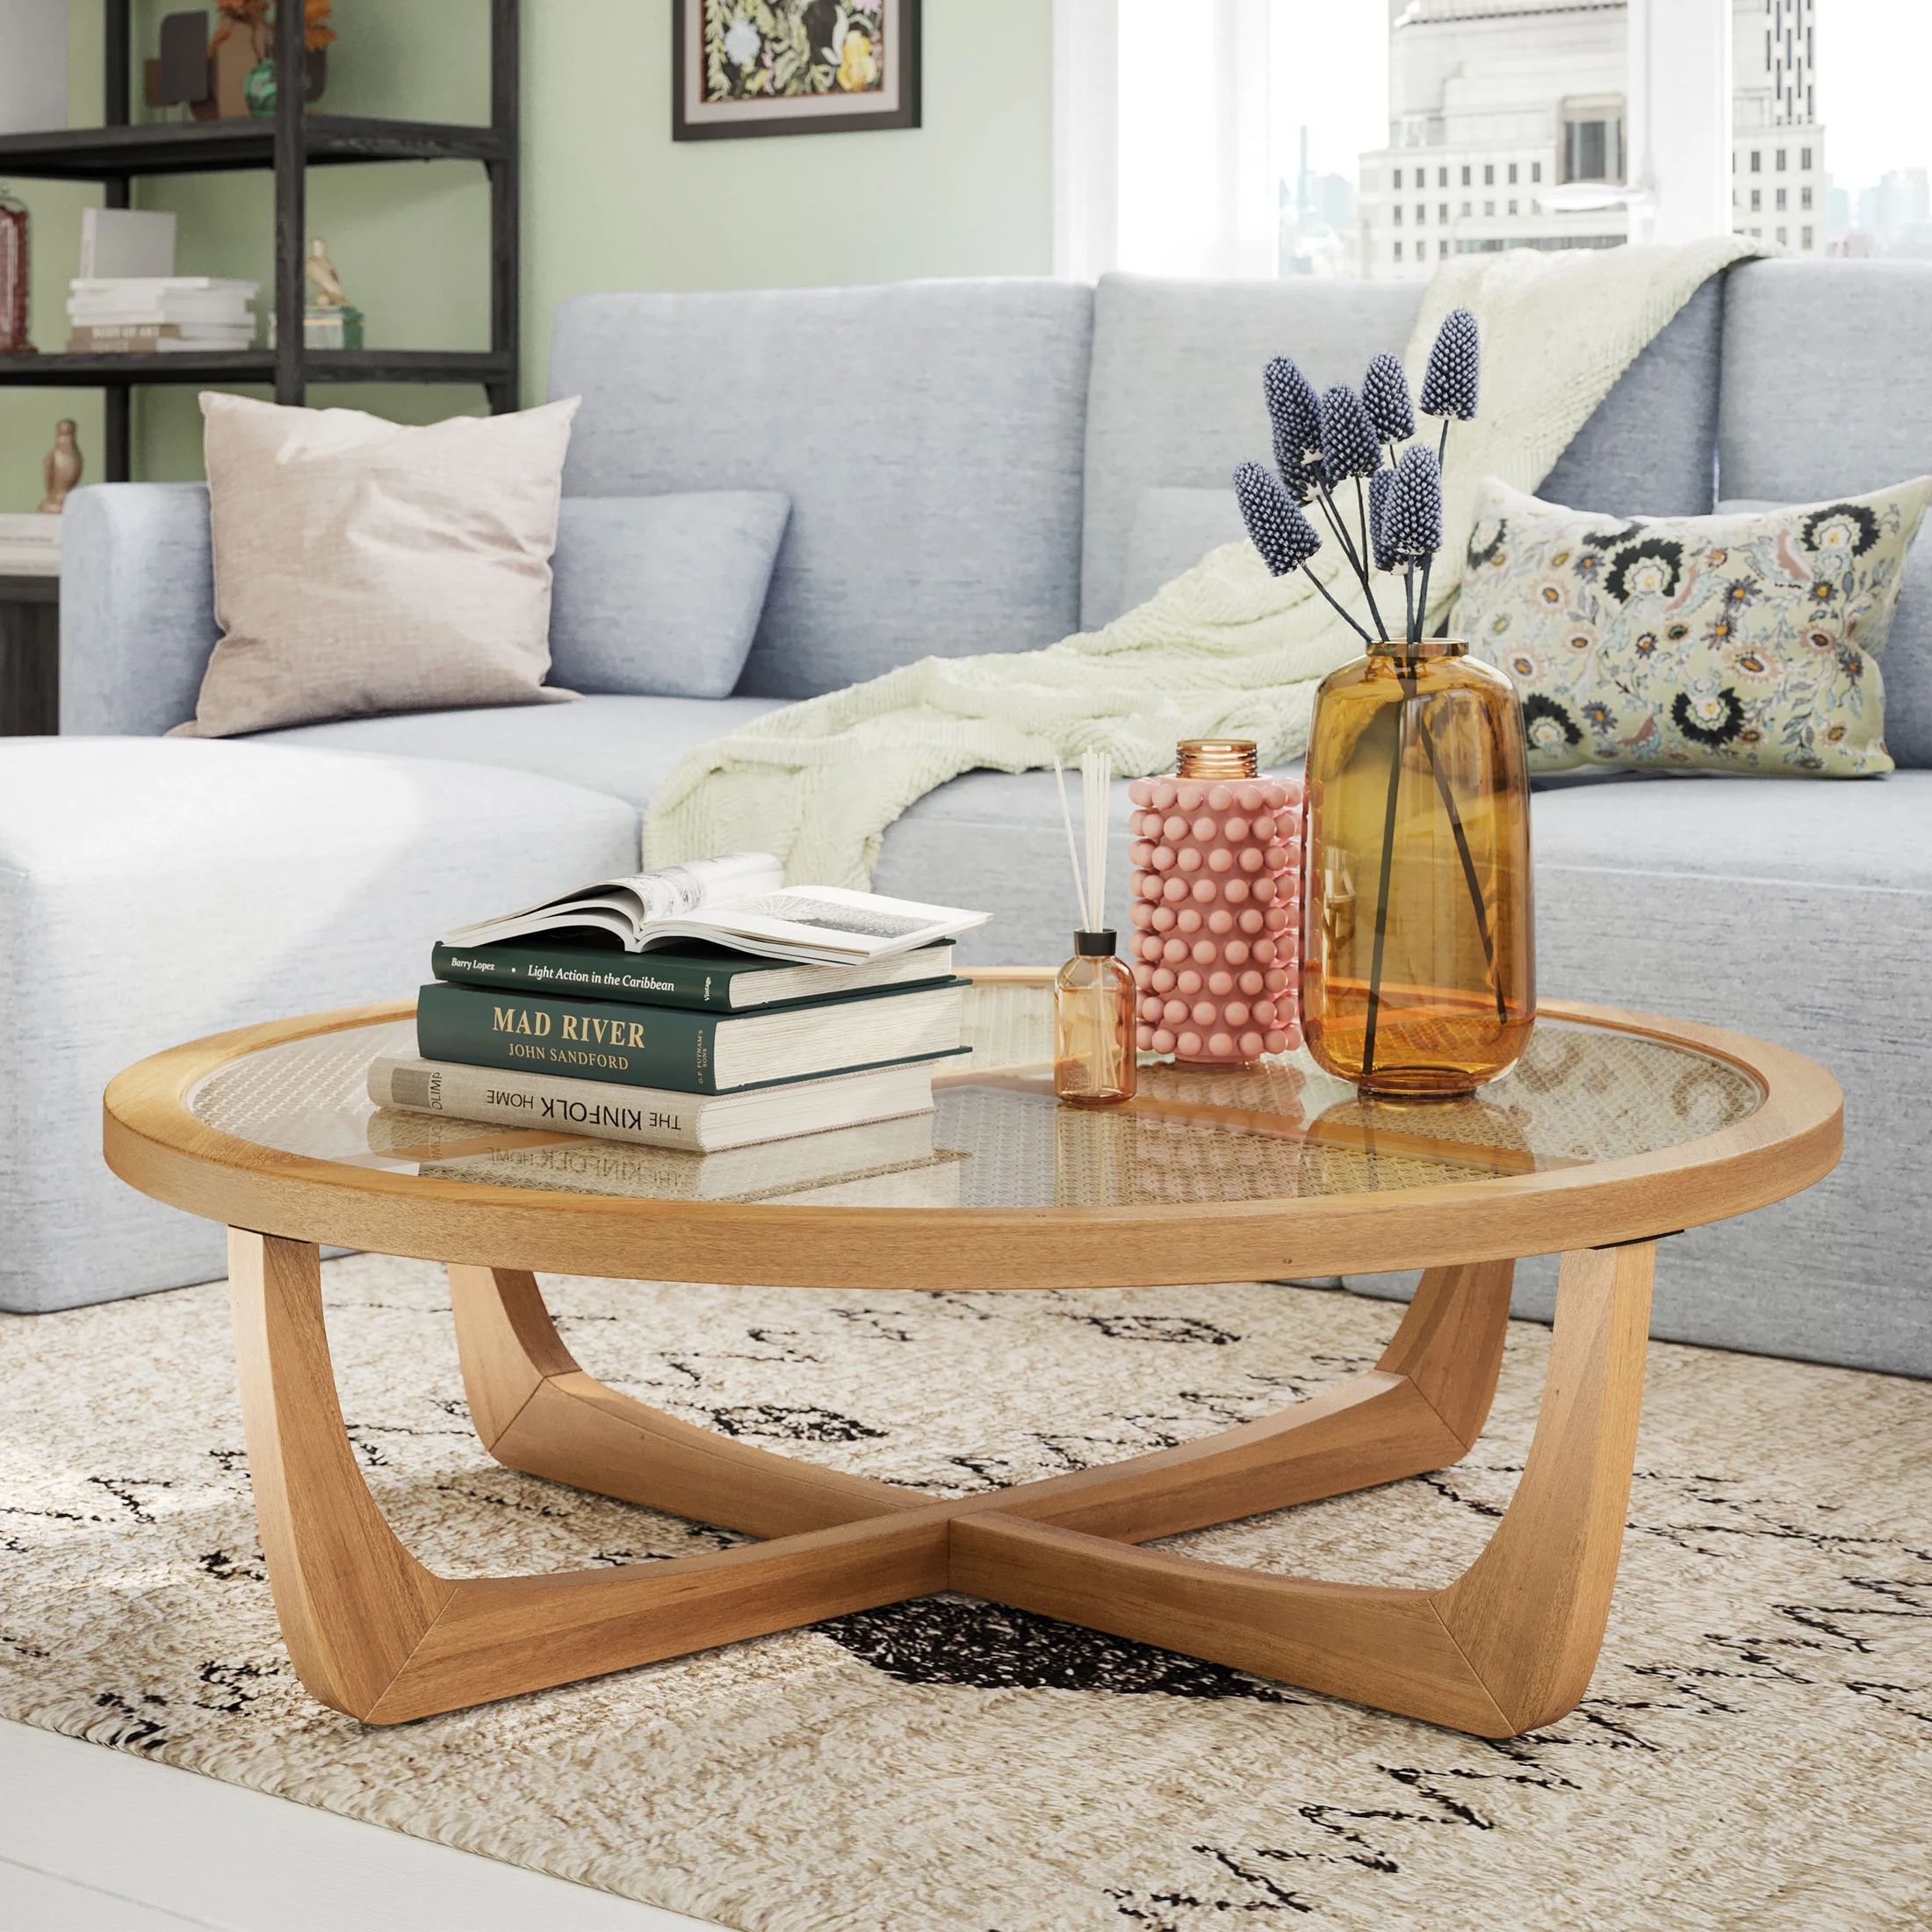 Beautiful Rattan & Glass Coffee Table with Solid Wood Frame by Drew Barrymore, Warm Honey Finish ... | Walmart (US)